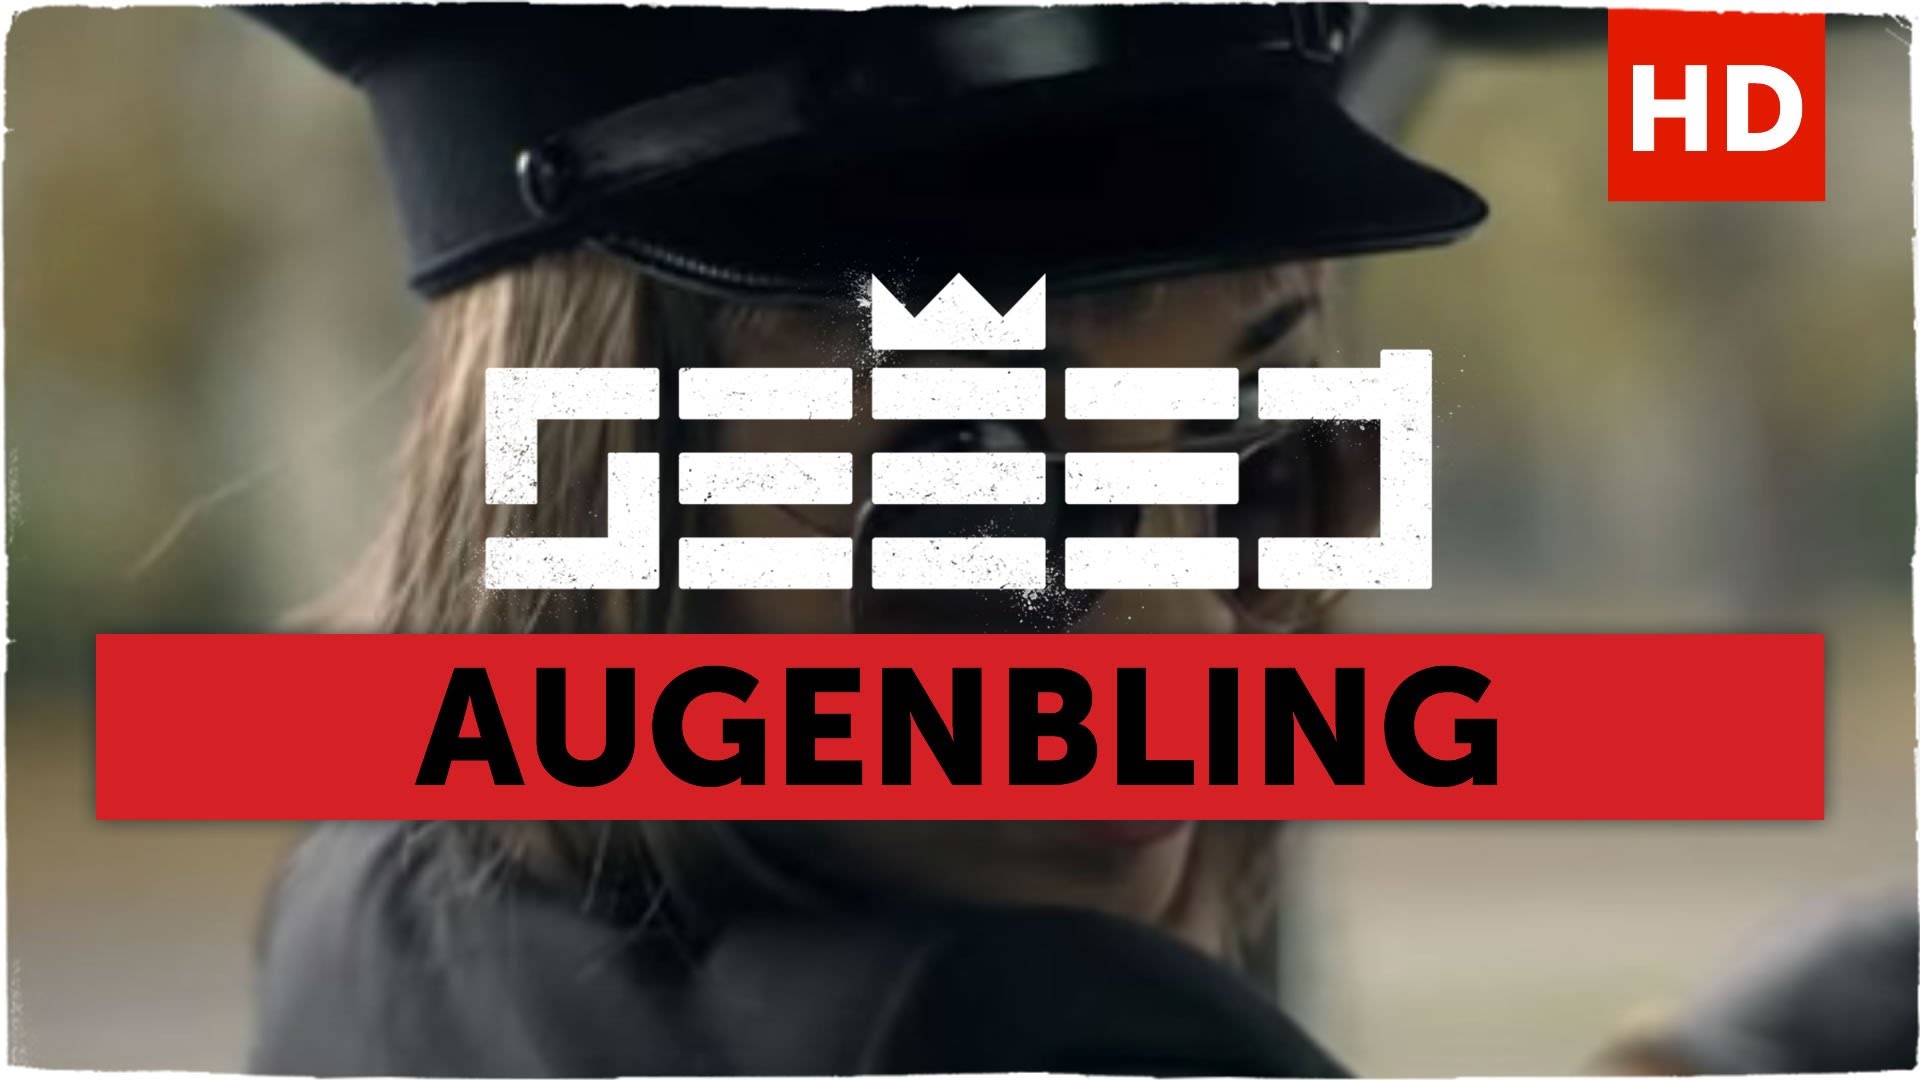 Seeed - Augenbling [11/3/2012]